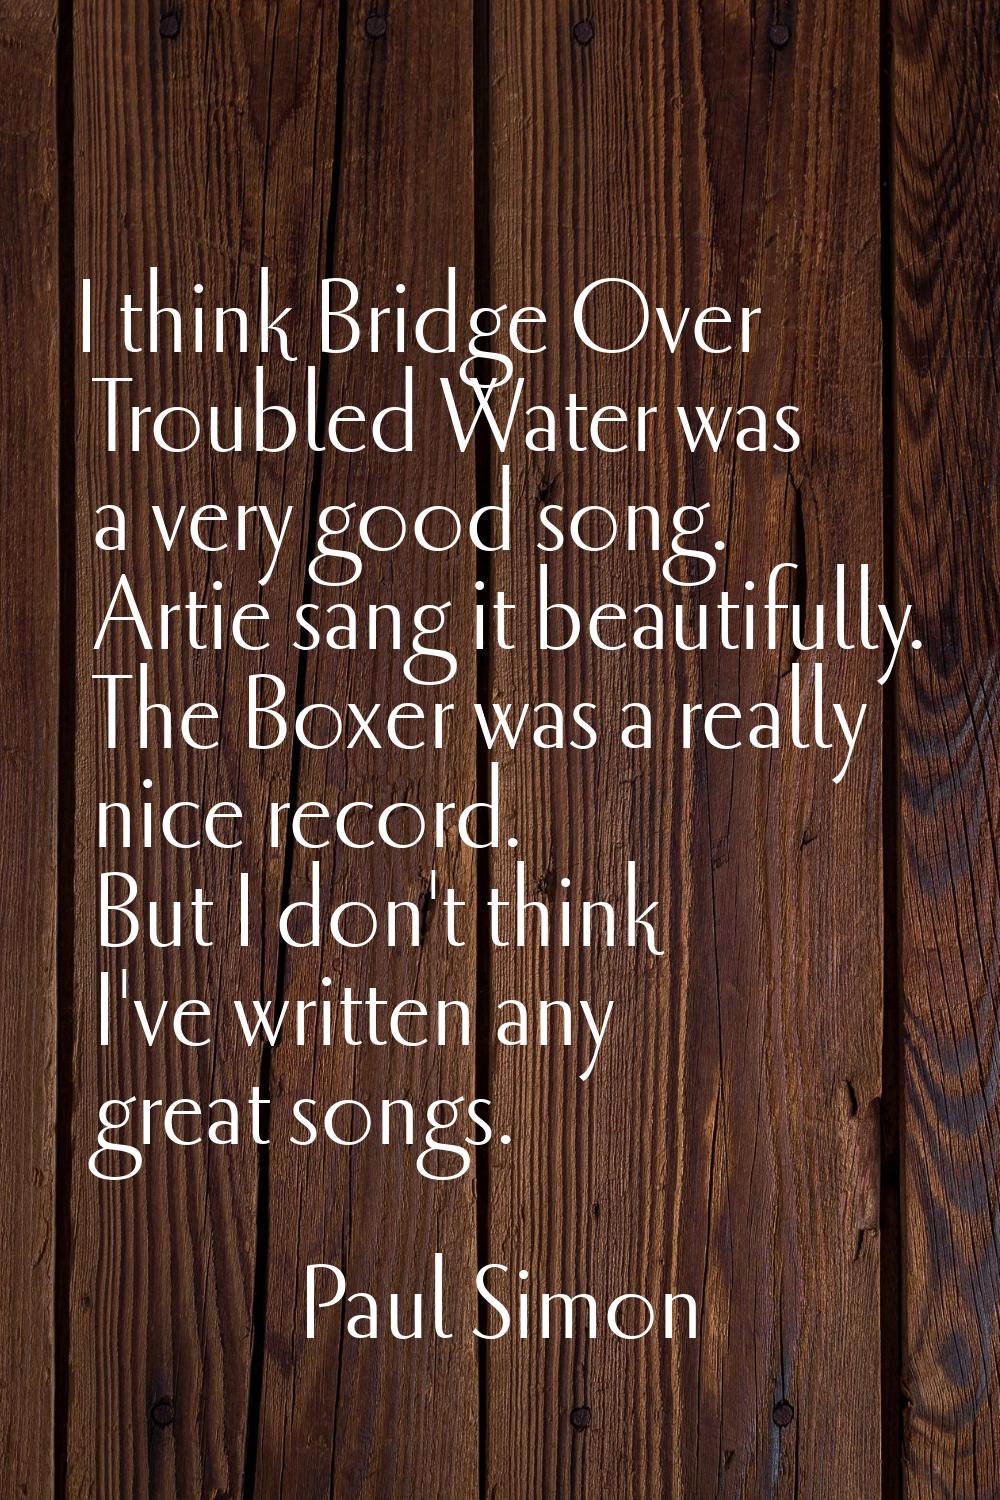 I think Bridge Over Troubled Water was a very good song. Artie sang it beautifully. The Boxer was a